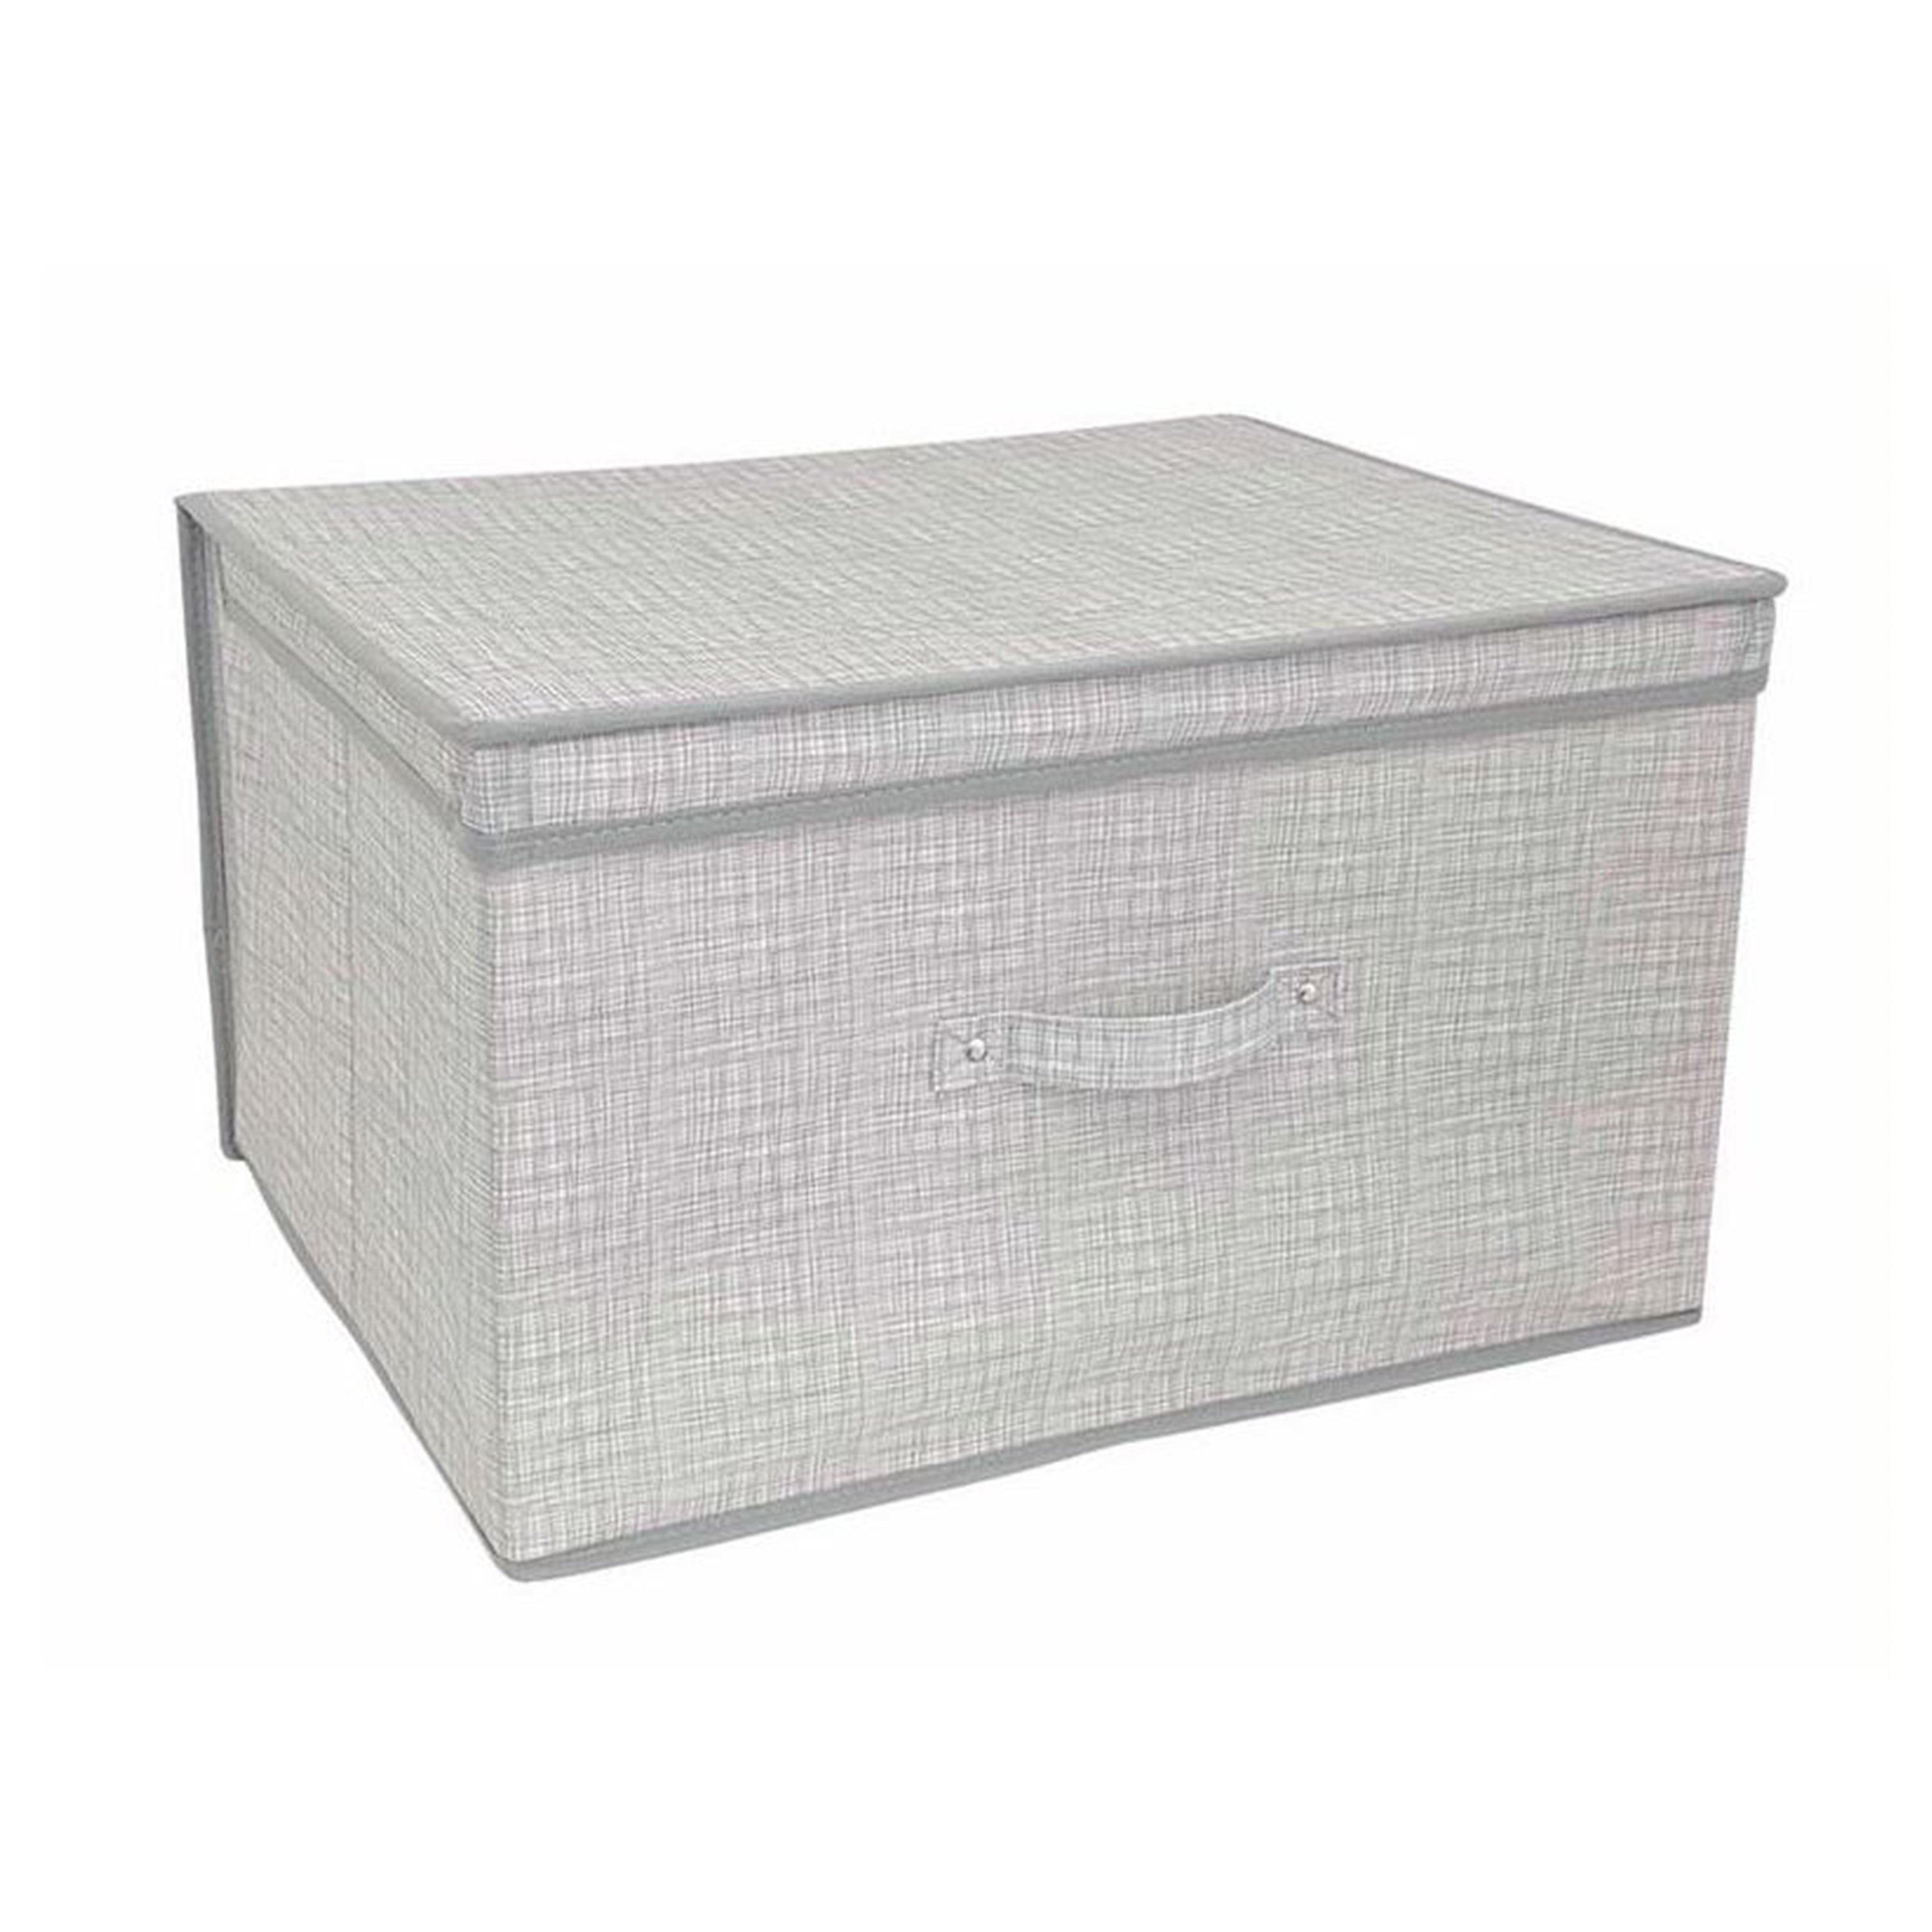 Linen Grey Large Storage Box GEEZY - The Magic Toy Shop